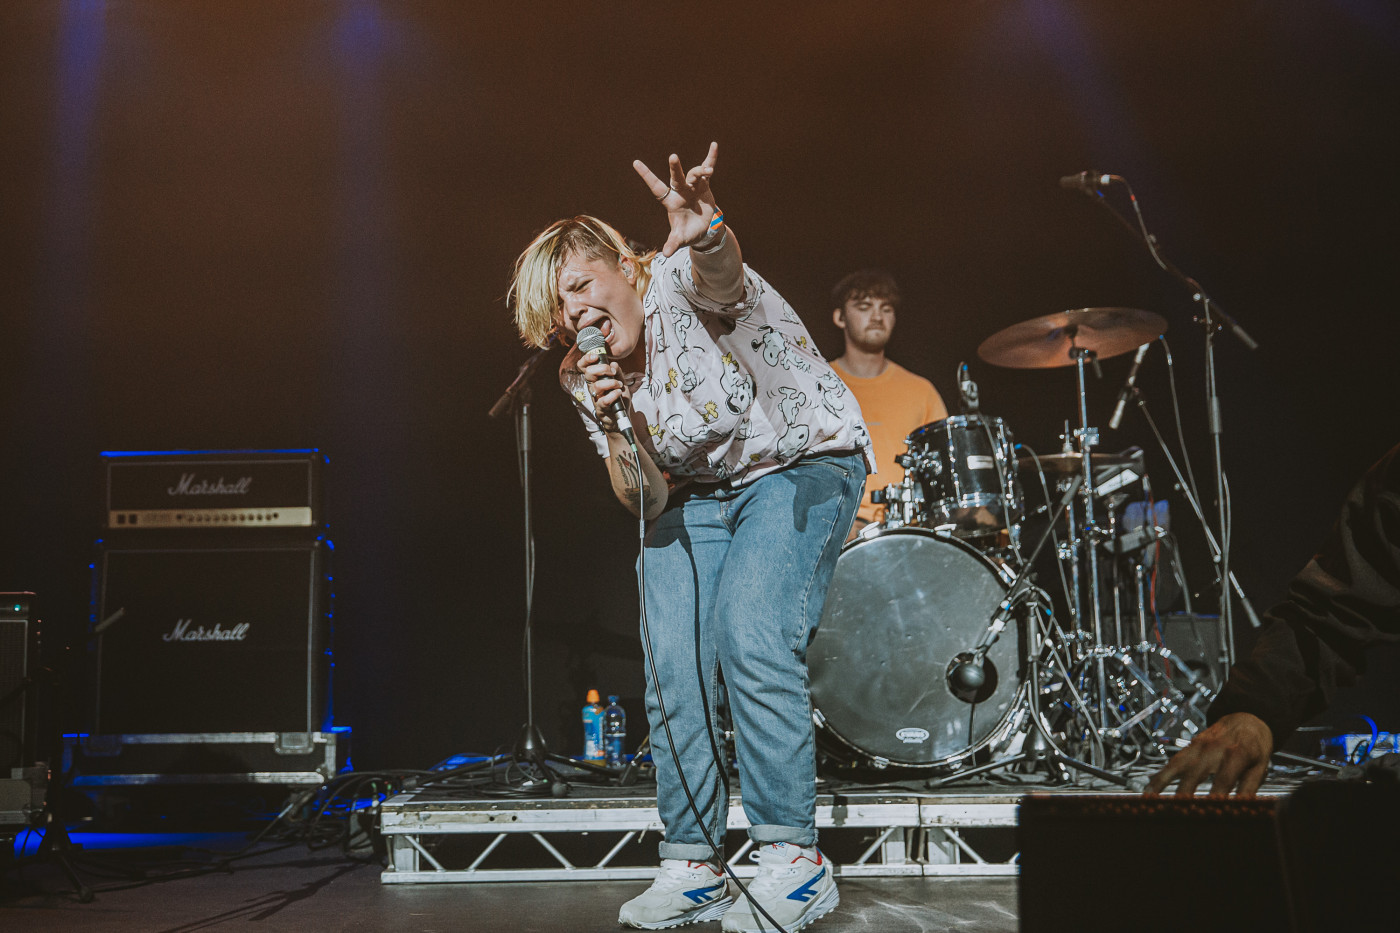 Bloxx showed why there's such a buzz around them at Tramlines 2021. 